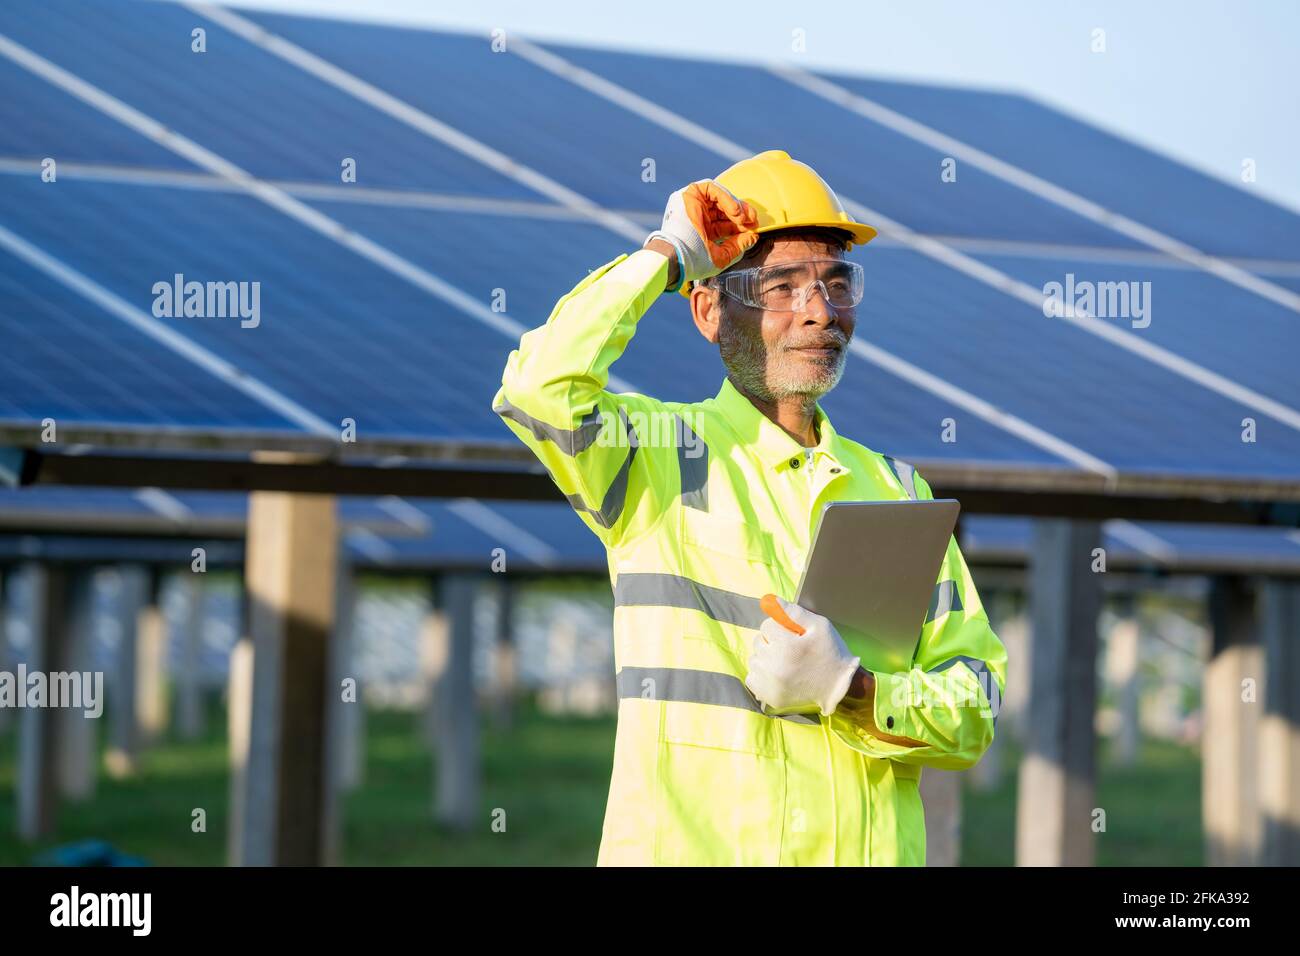 Supervisor Engineers men wearing safety vest and safety helmet Stock Photo